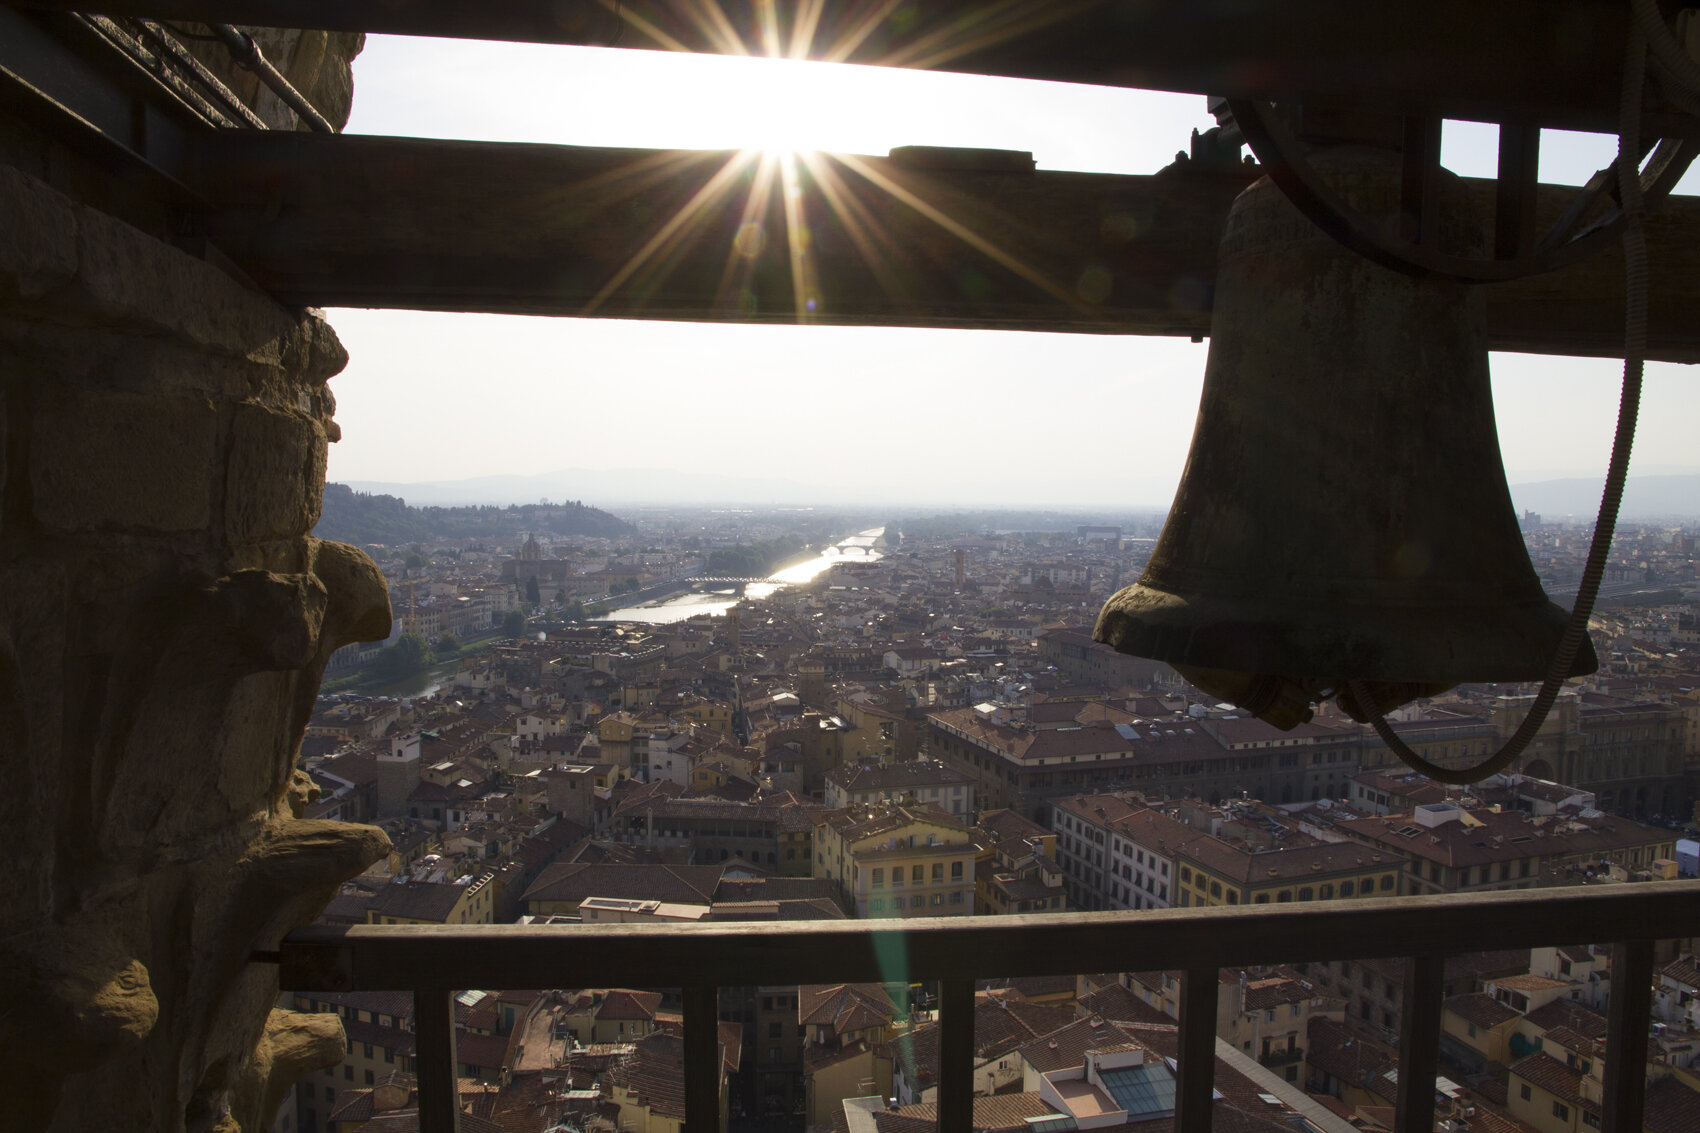  This photo taken from the top of Palazzo Vecchio, looking down on the heart of Florence, a city that has been greatly enhanced by AWA’s efforts to reclaim a forgotten part of its history – that of female genius. (Ph. F. Cacchiani) 